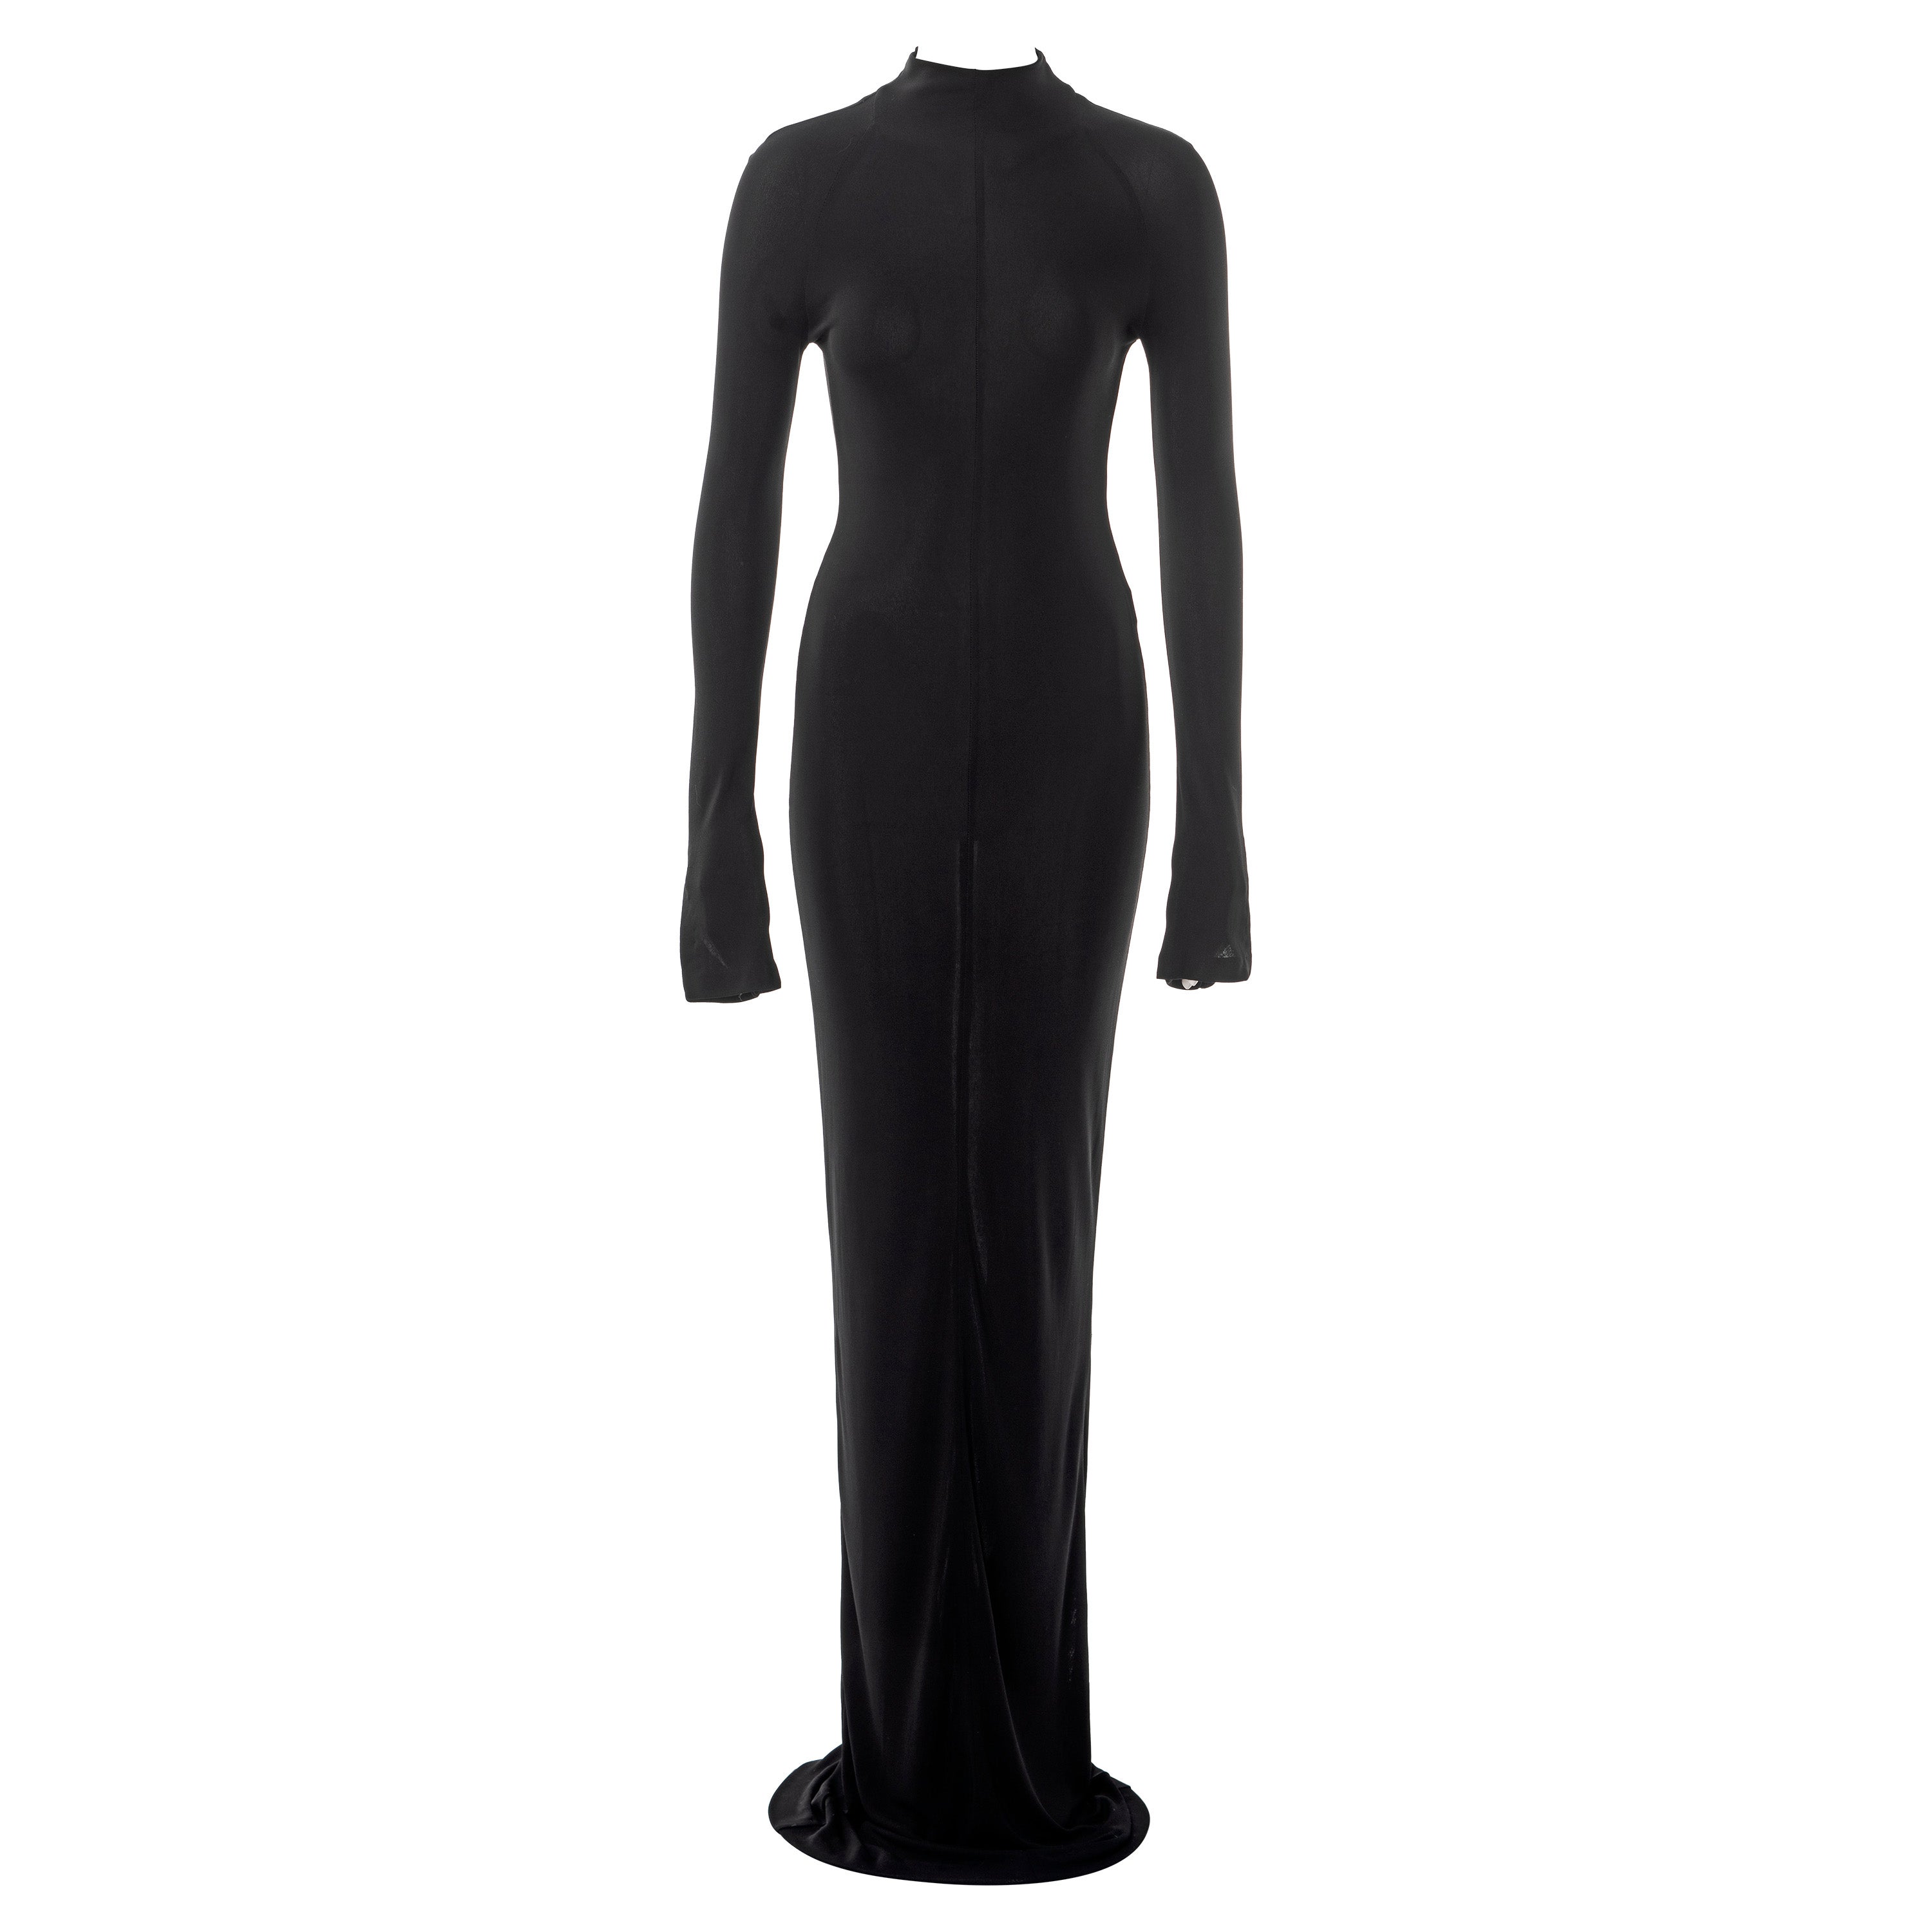 Gucci by Tom Ford black rayon jersey long sleeve bodycon maxi dress, ss 1998